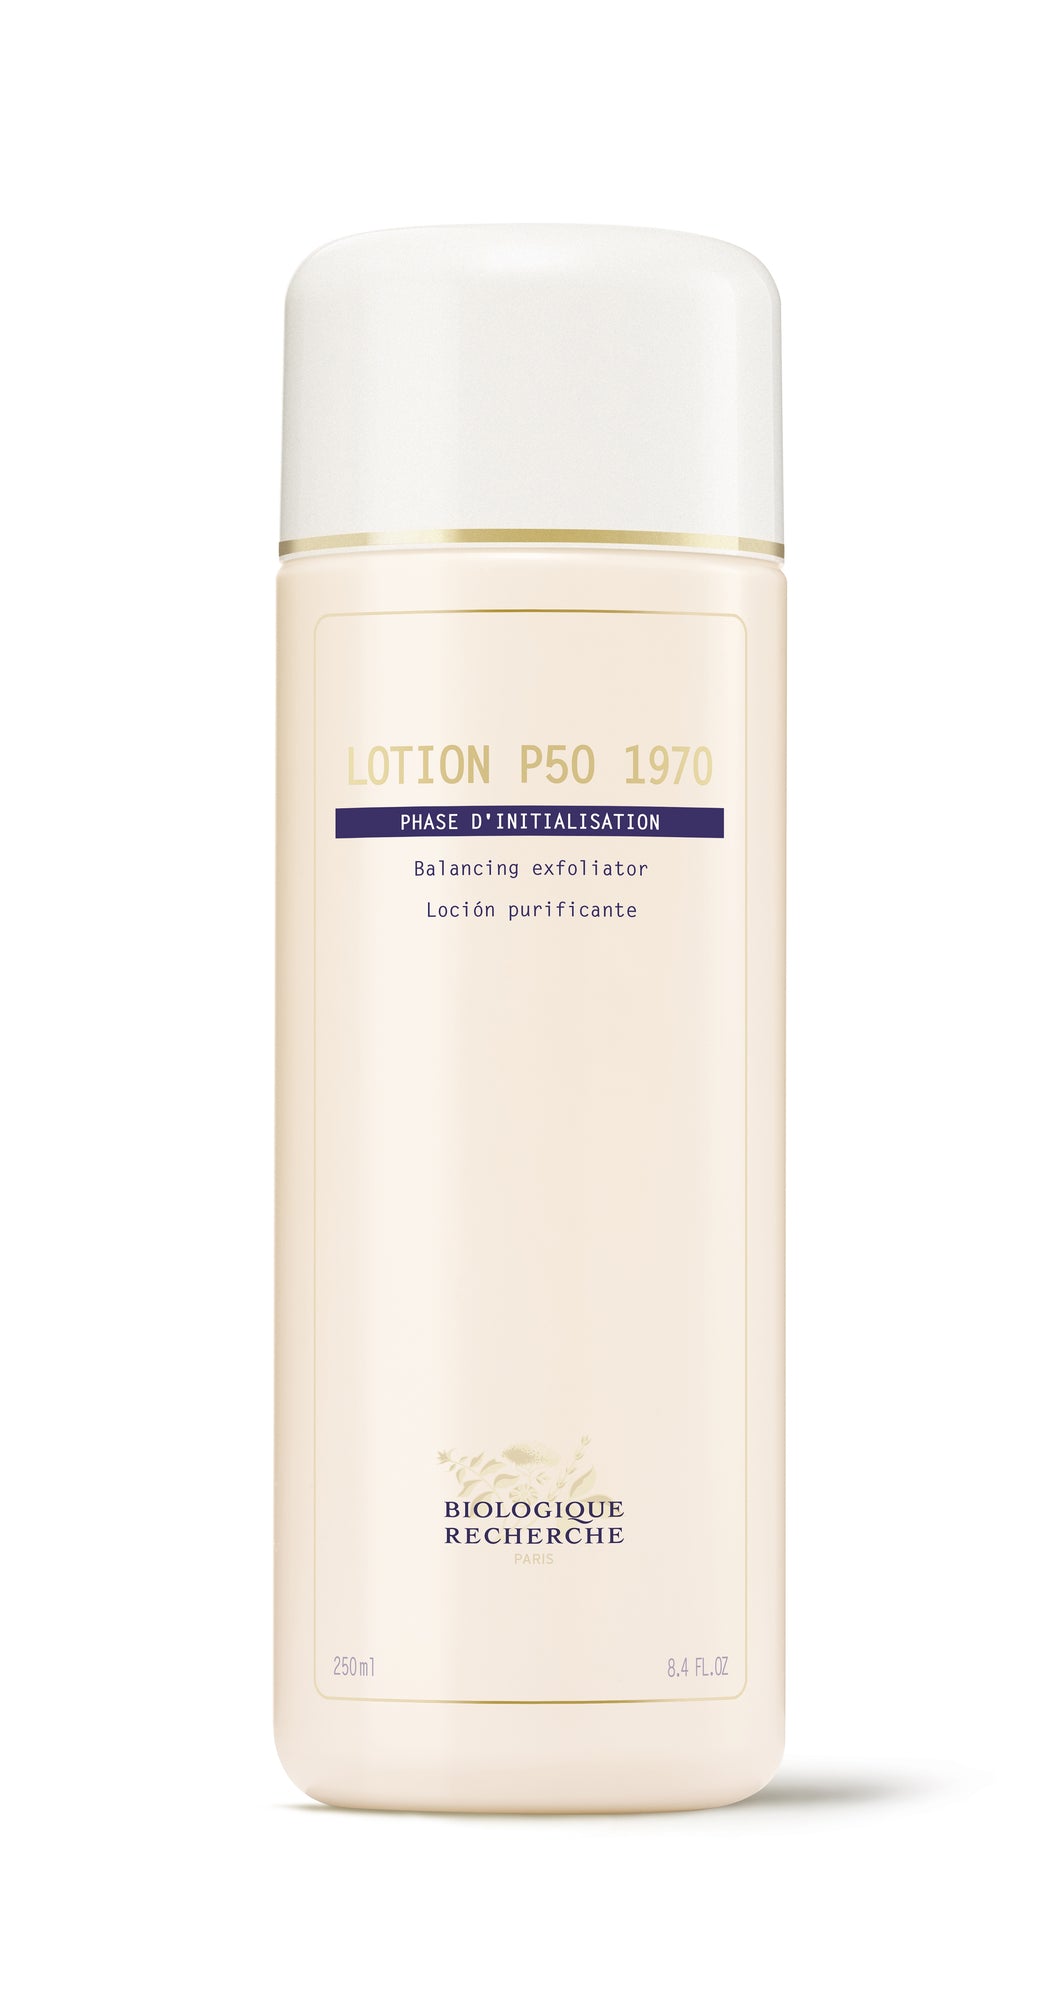 BIOLOGIQUE RECHERCHE, Acne, Dull and Fatigued Skin, Enlarged Pores, Hyperpigmentation, Oily Skin, Wrinkles and Fine Lines, Exfoliating Toner, Lotion P50 1970, Toner, Philadelphia Spa, Victoria Roggio Beauty, Biologique Recherche Paris, Skincare, Victoria Roggio Spa